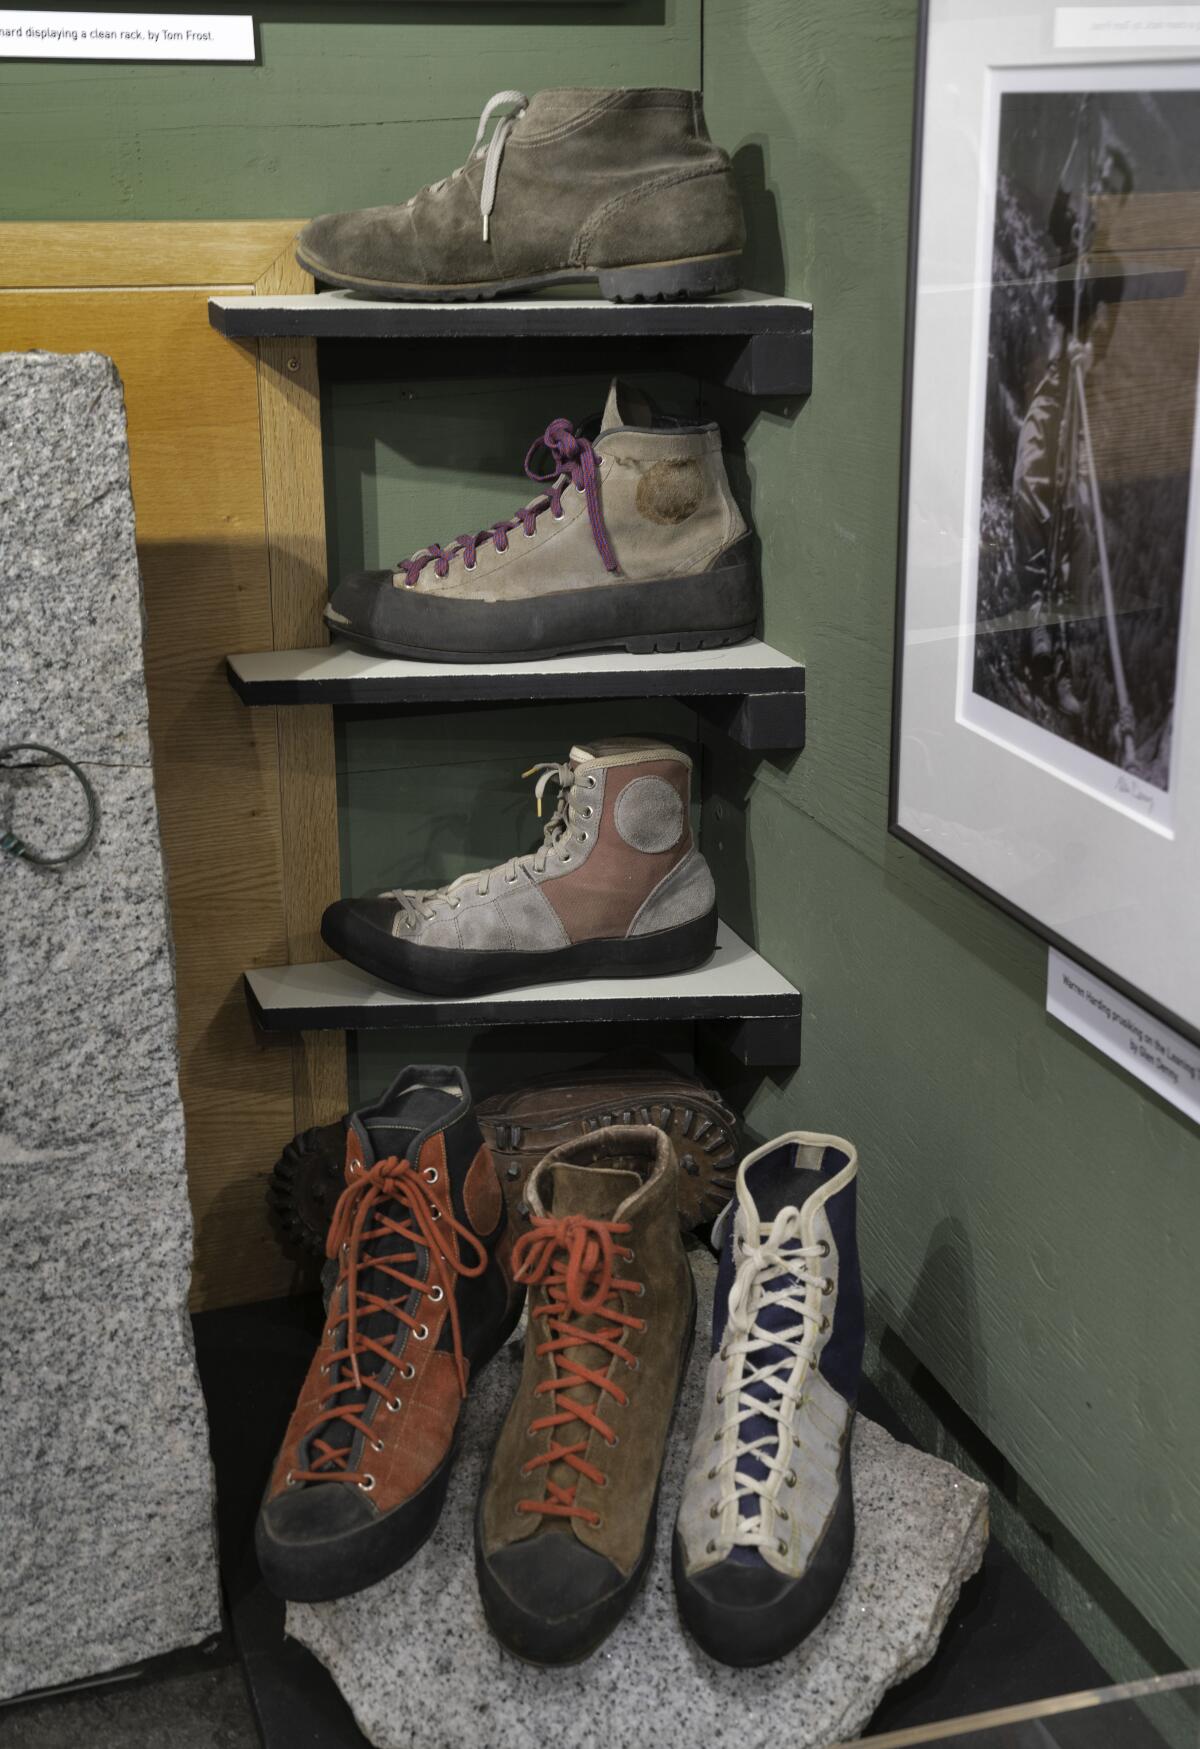 Old climbing boots on shelves